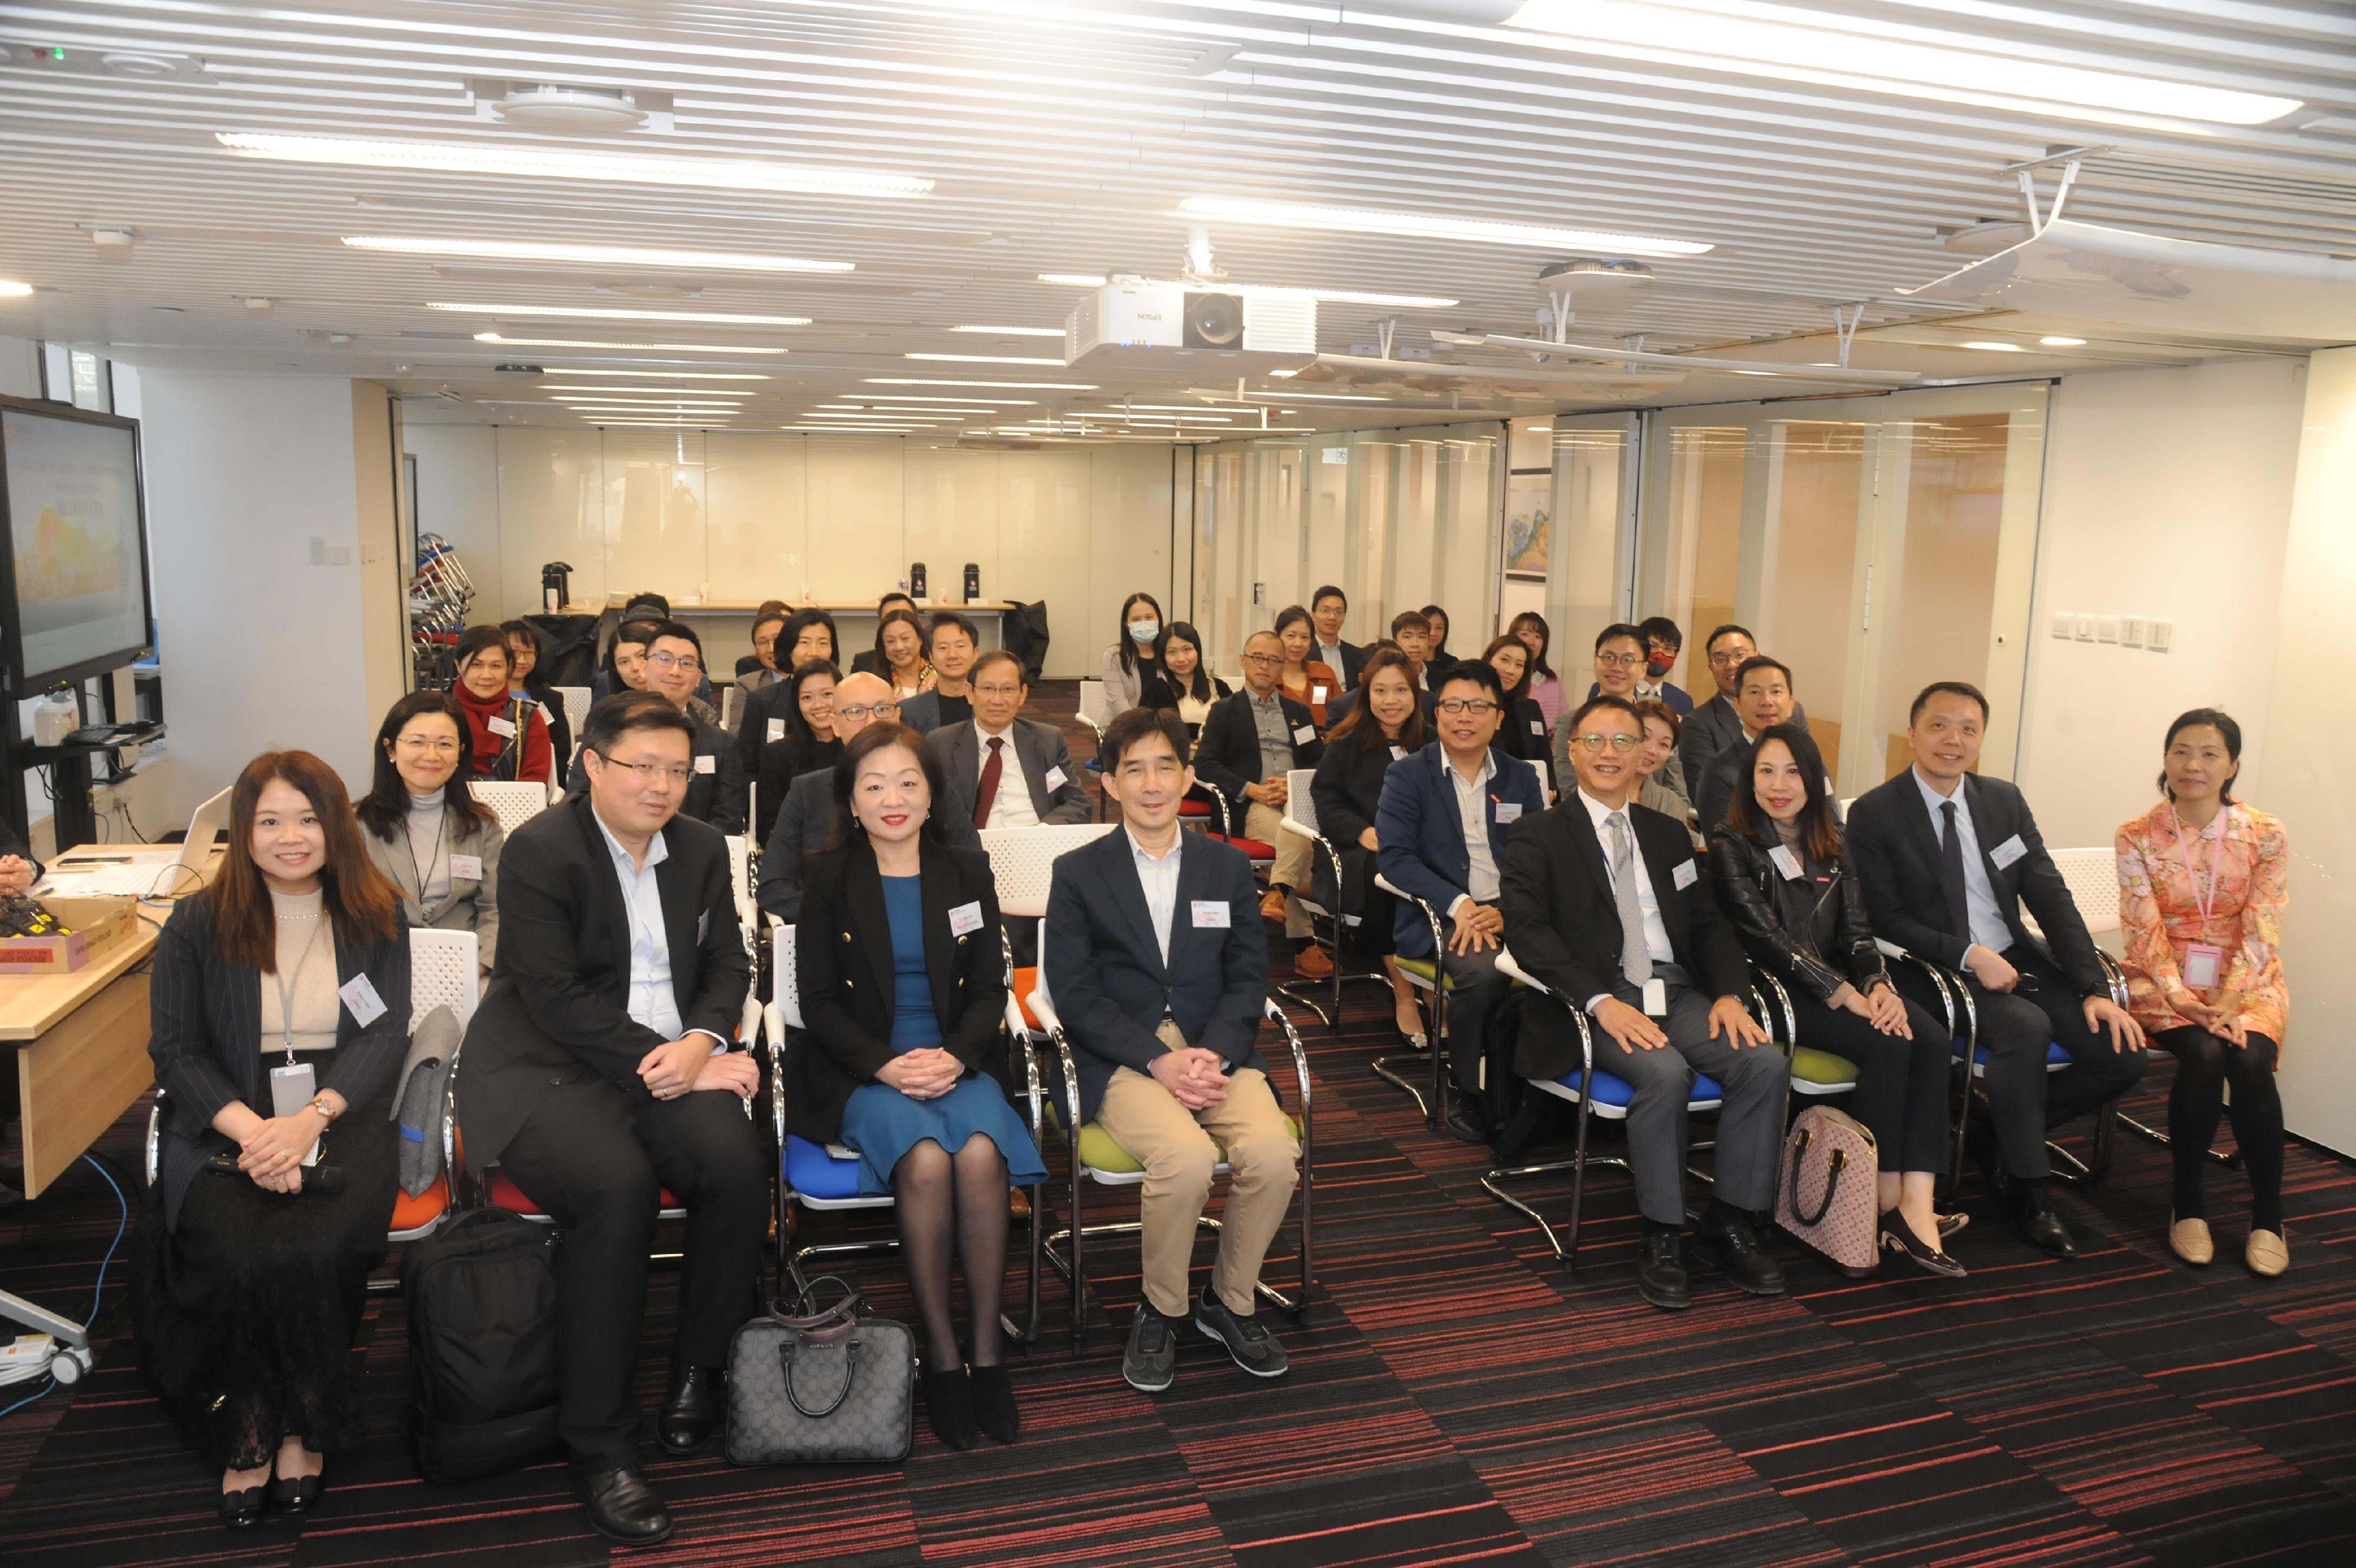 The Office for Attracting Strategic Enterprises (OASES) held a networking event themed "Meet the Partners" today (November 17). Photo shows the Director-General of OASES, Mr Philip Yung (front row, fourth left), with attending guests at the networking event.
